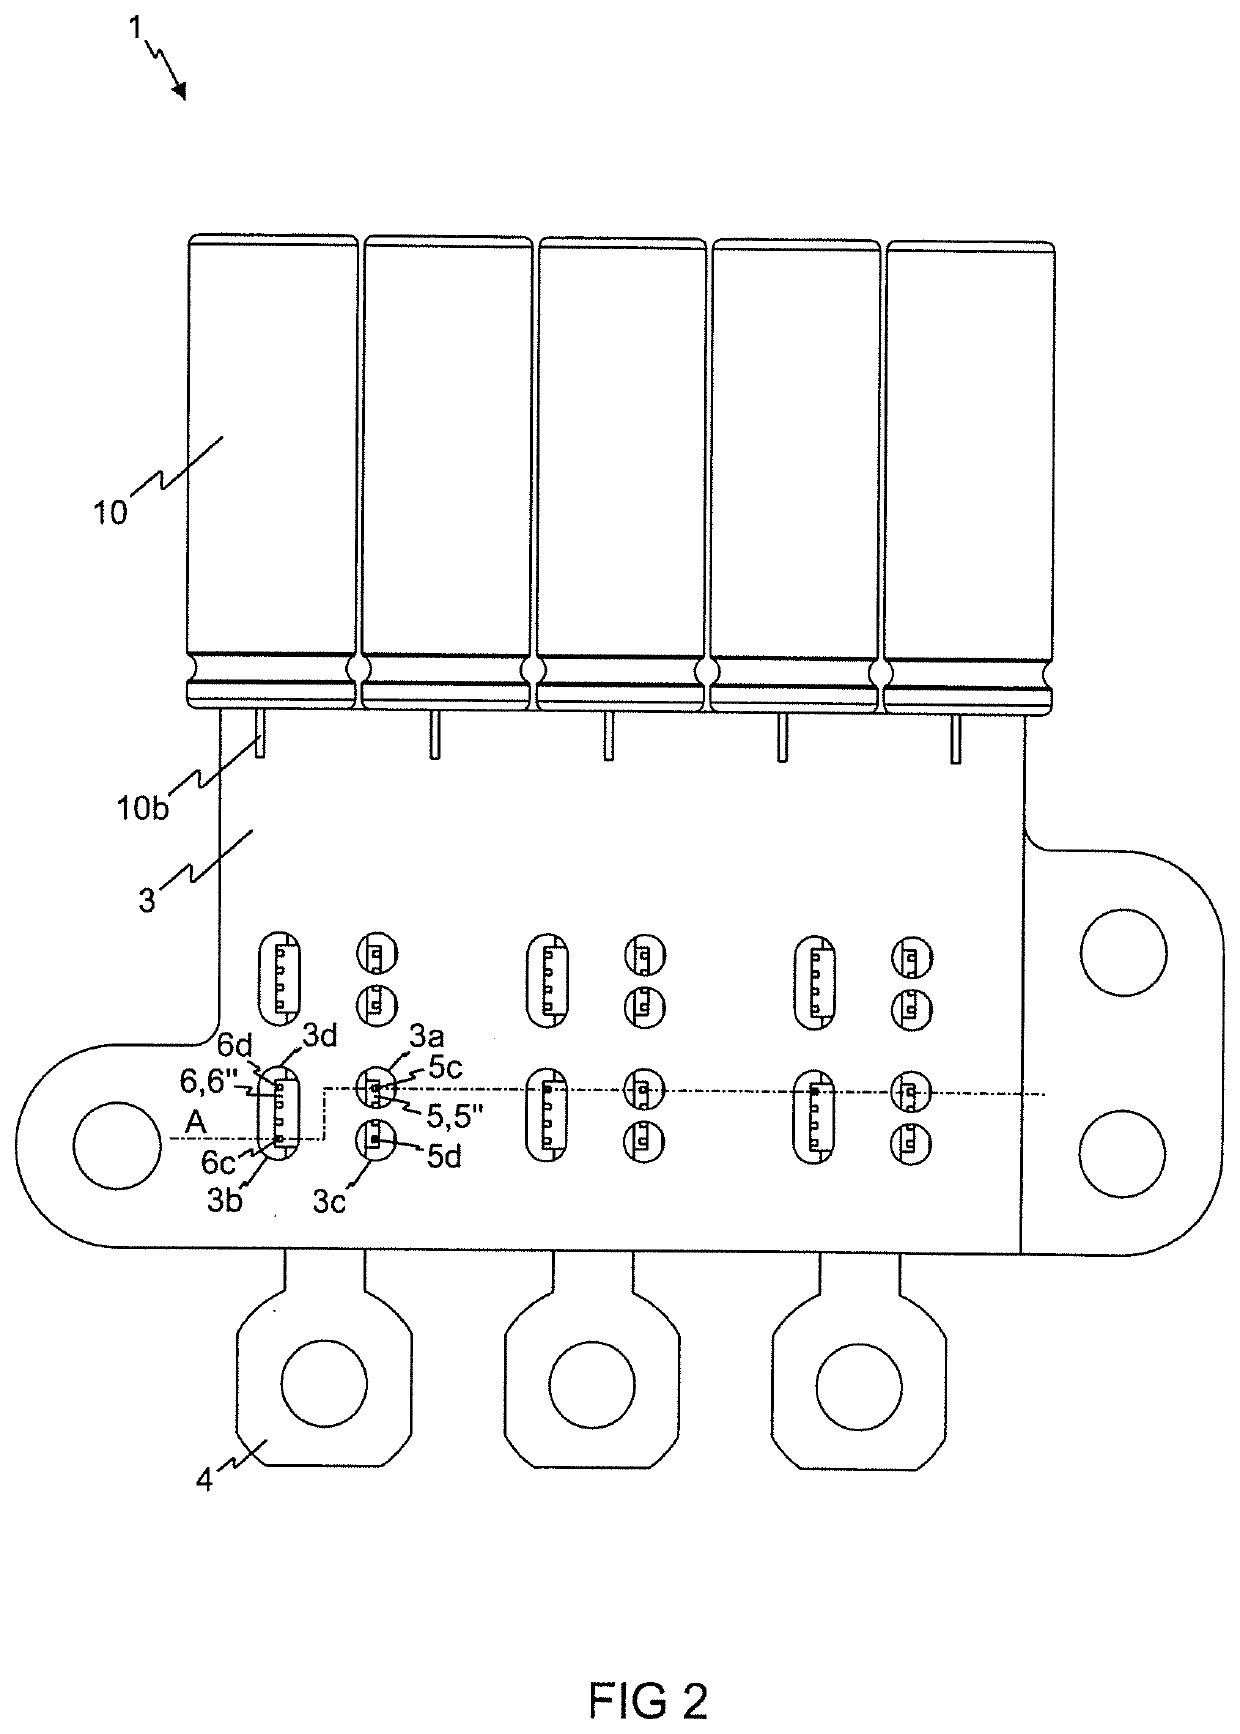 Power semiconductor module with power semiconductor switches